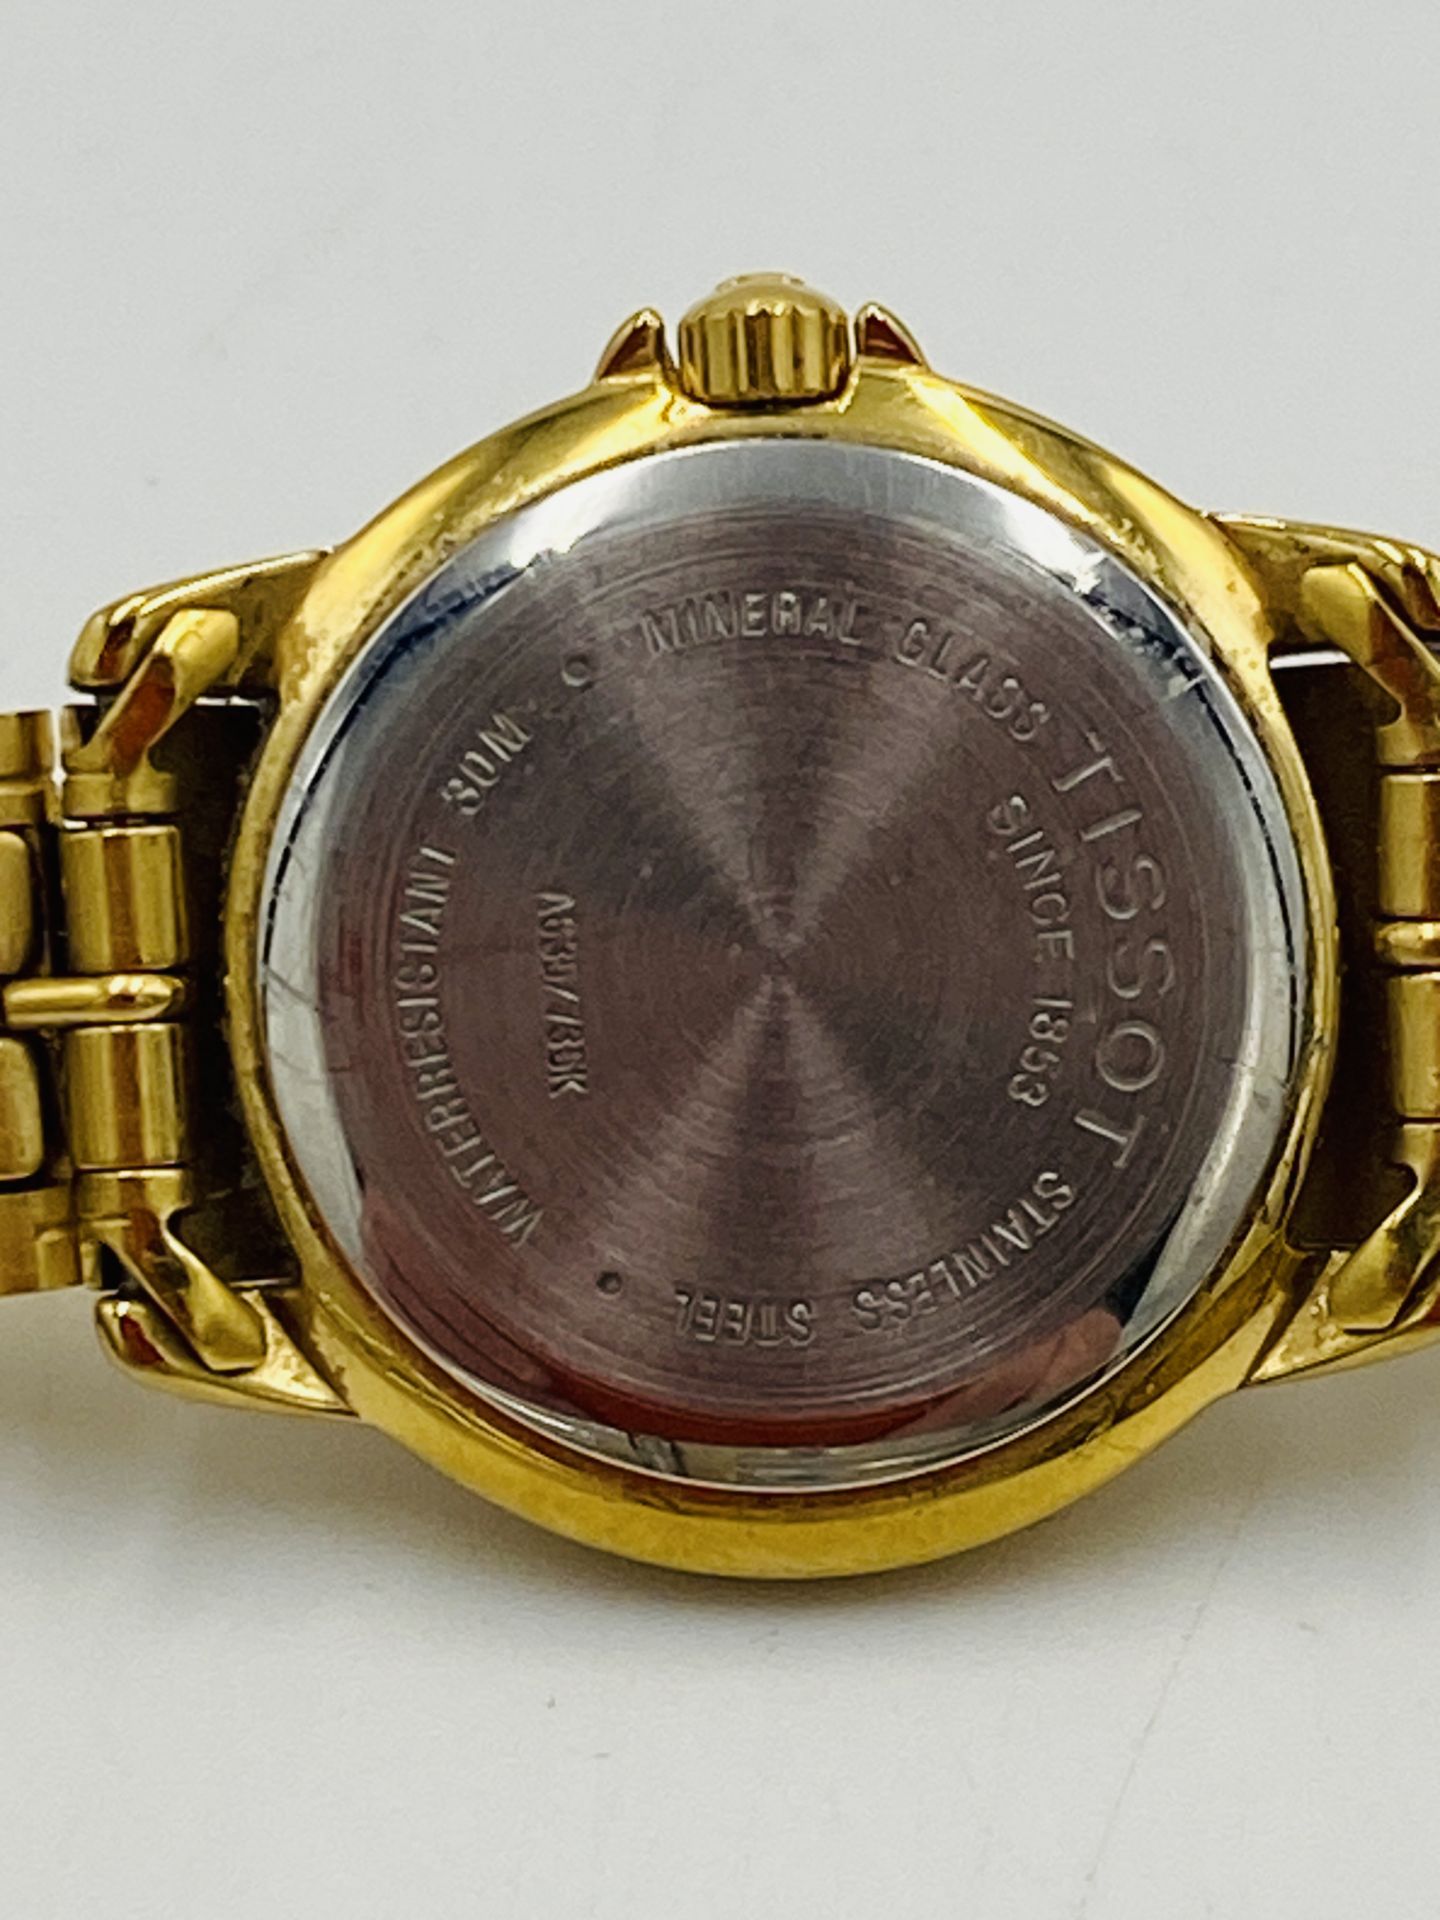 Tissot gold plated ladies watch - Image 3 of 5